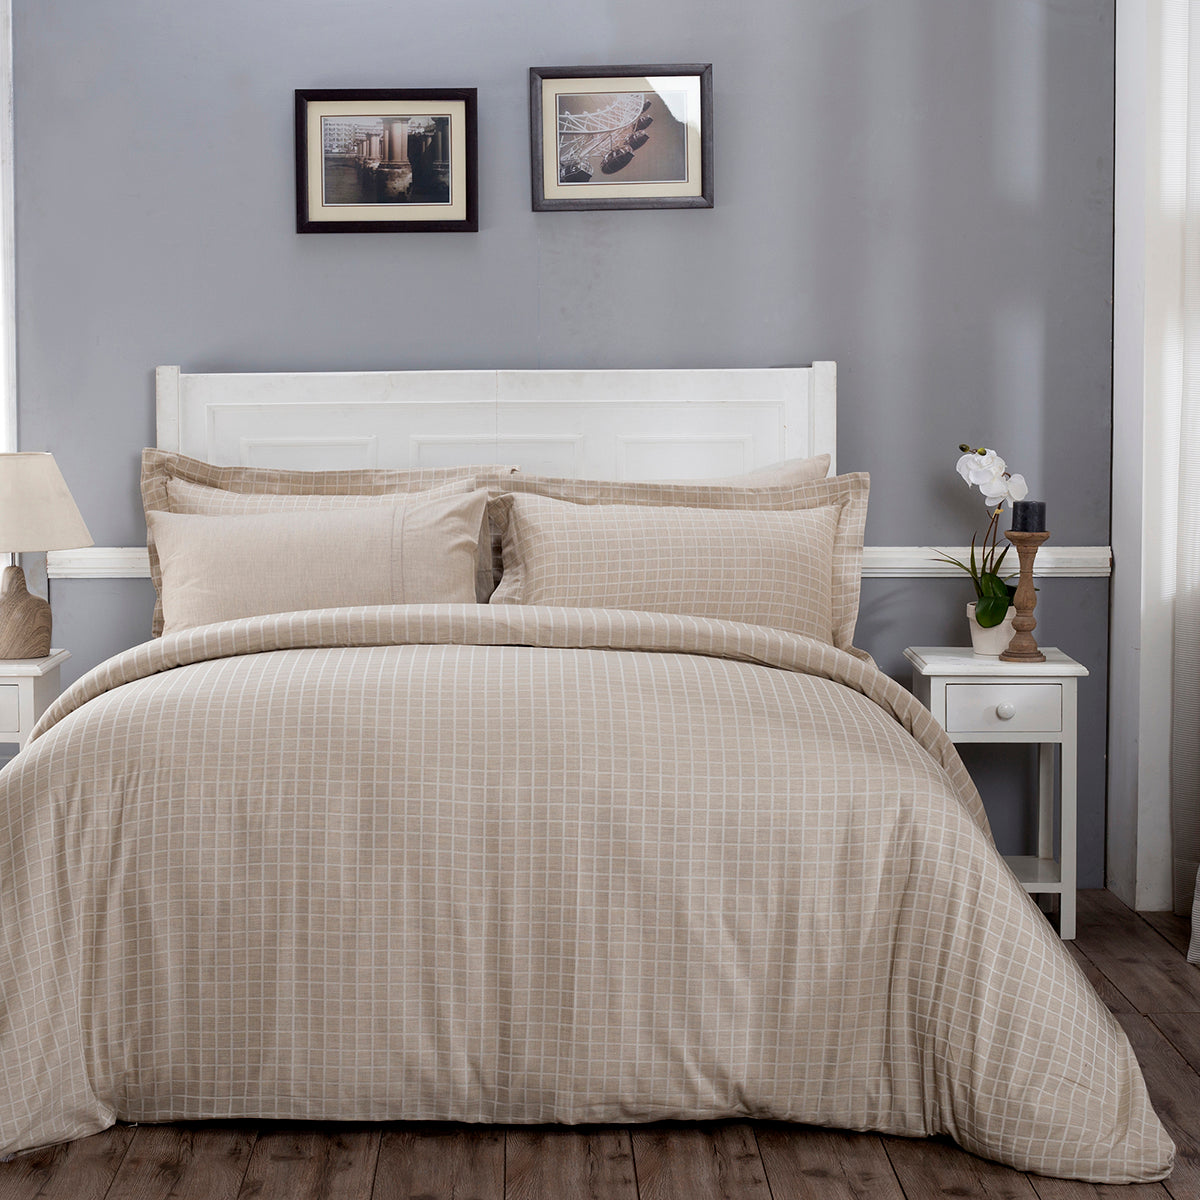 Bliss Reversible Made With Egyptian Cotton Ultra Soft Beige Duvet Cover With Pillow Case